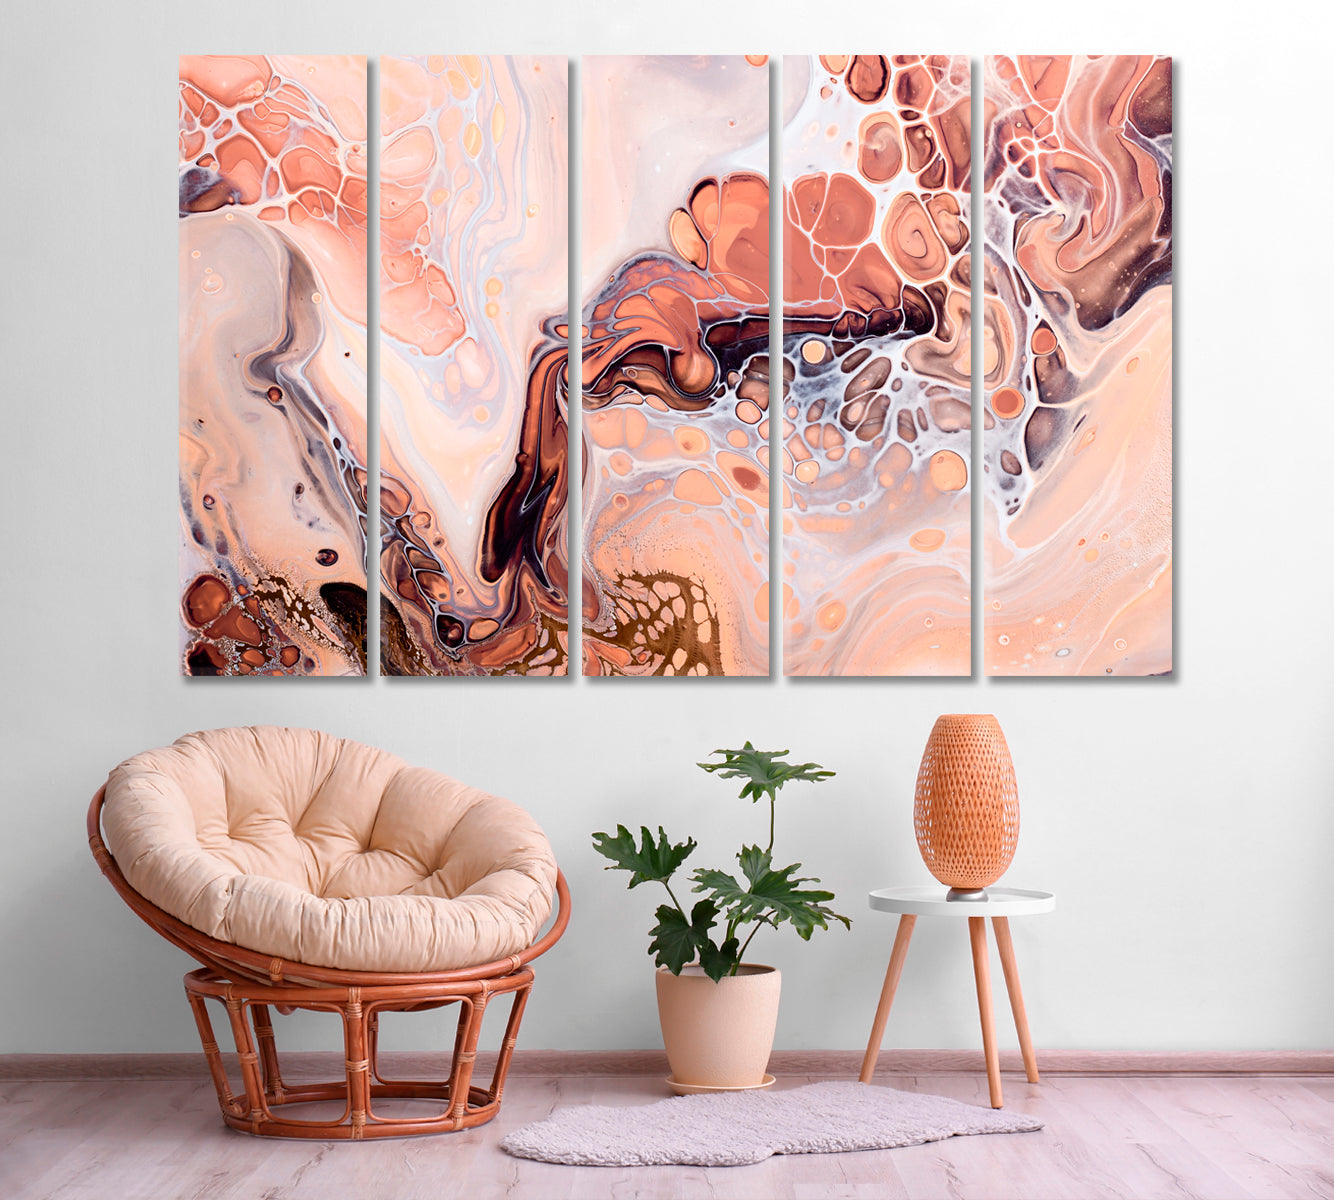 Pastel Colors Acrylic Bubbles Abstract Design Canvas Print ArtLexy 5 Panels 36"x24" inches 